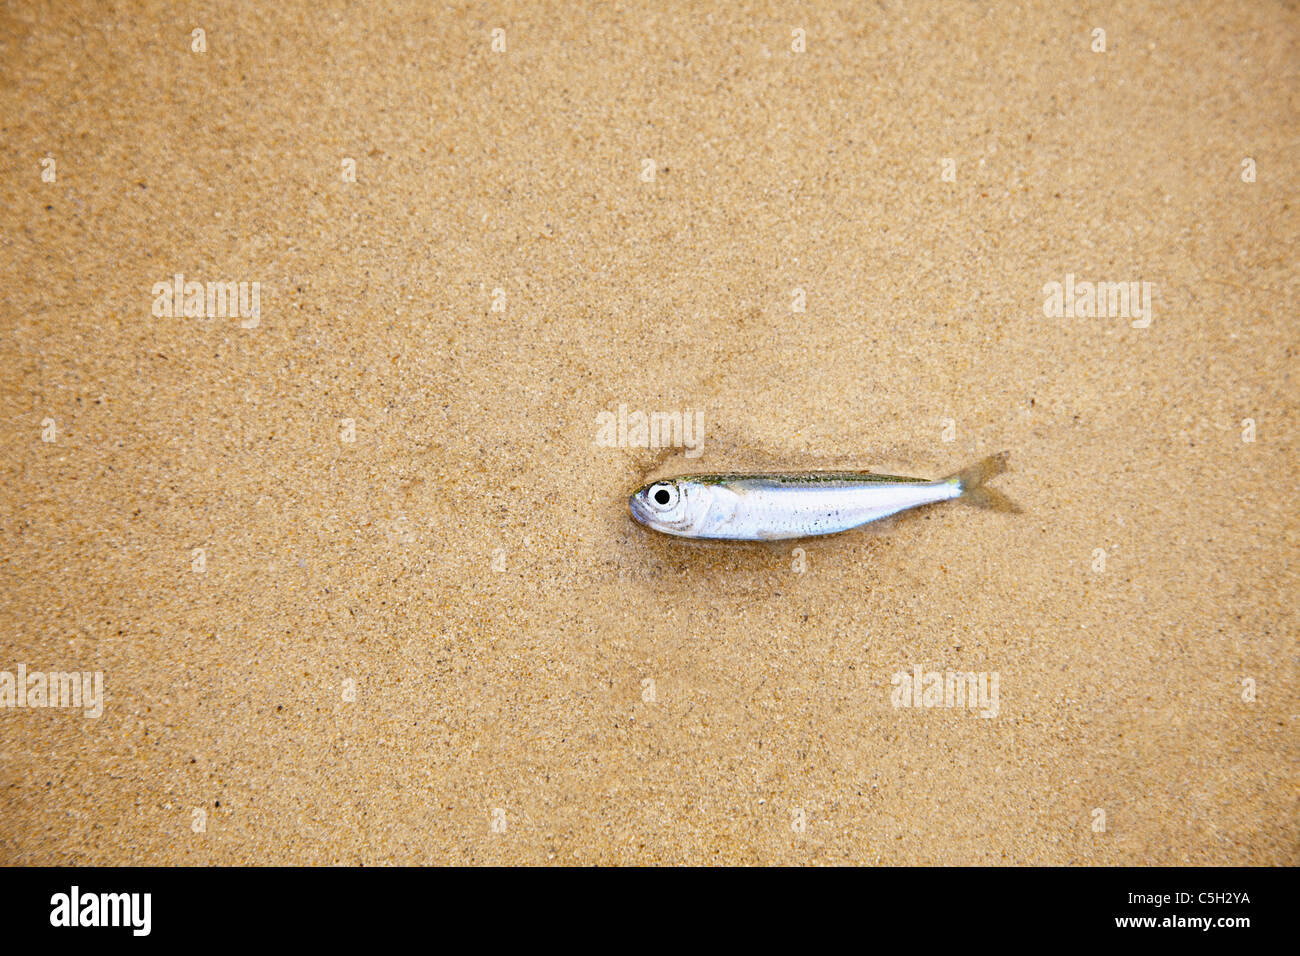 A little fish lying on a sandy beach - has died Stock Photo